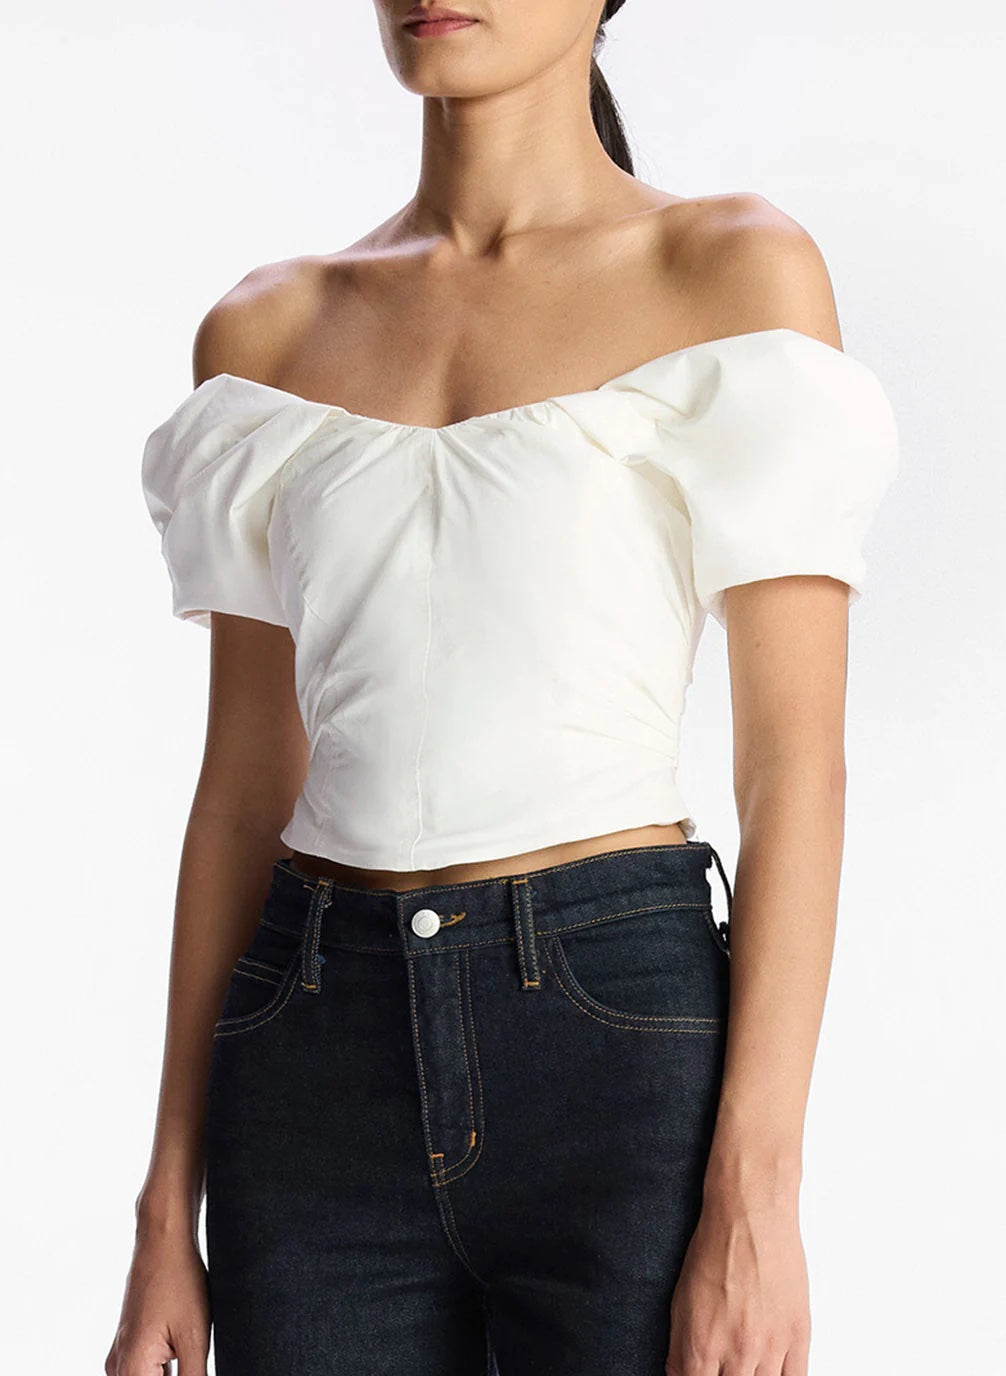 The ALC Nora Top in white available at The New Trend Australia